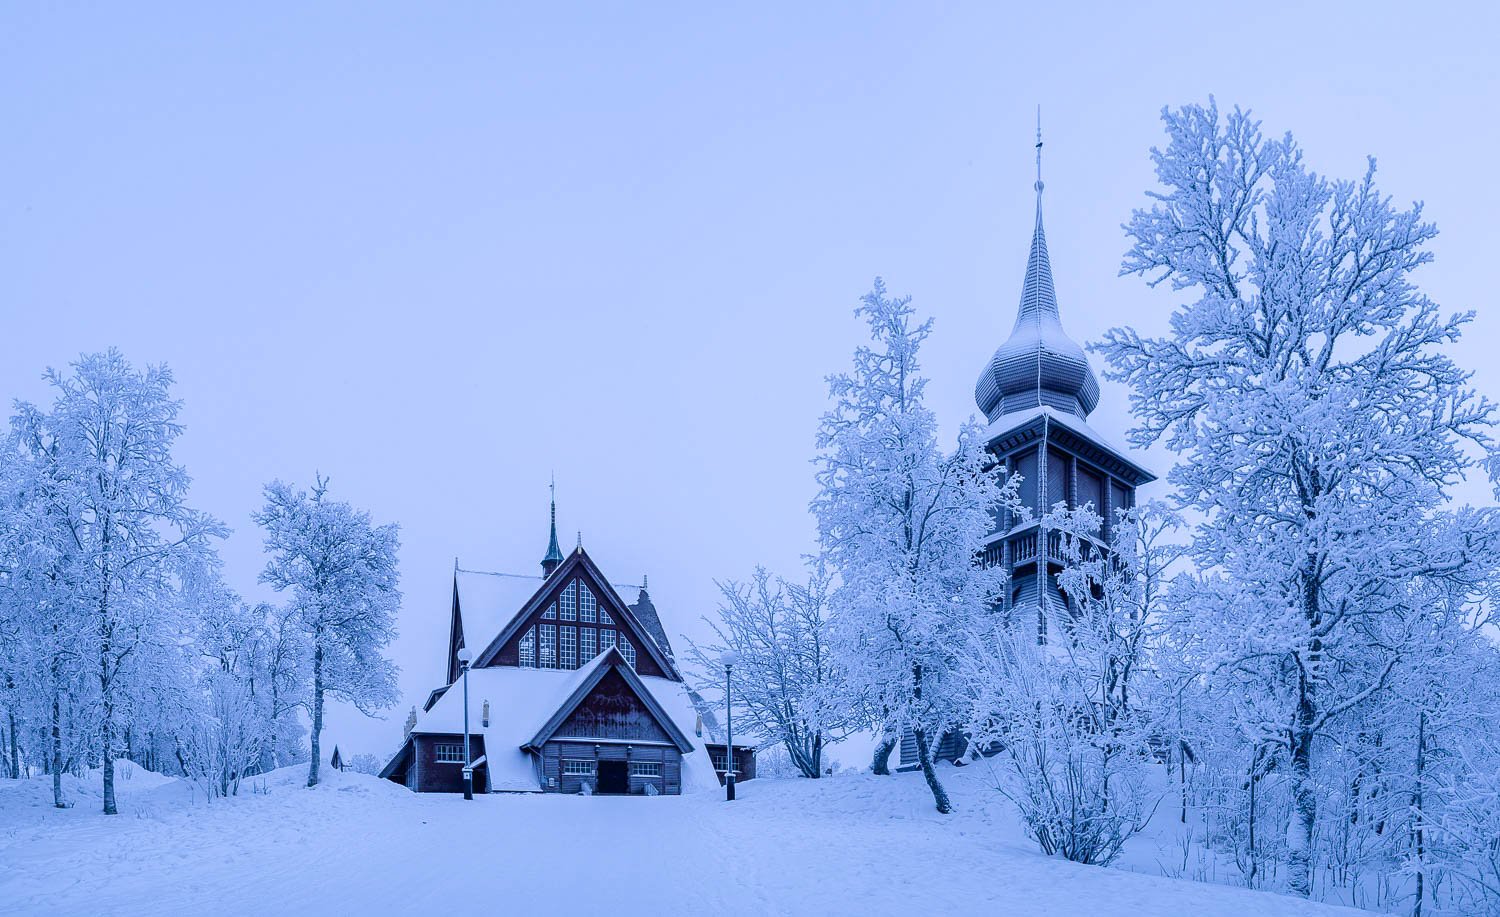  A house and a tower in a fully snow-covered area, Sweden #32